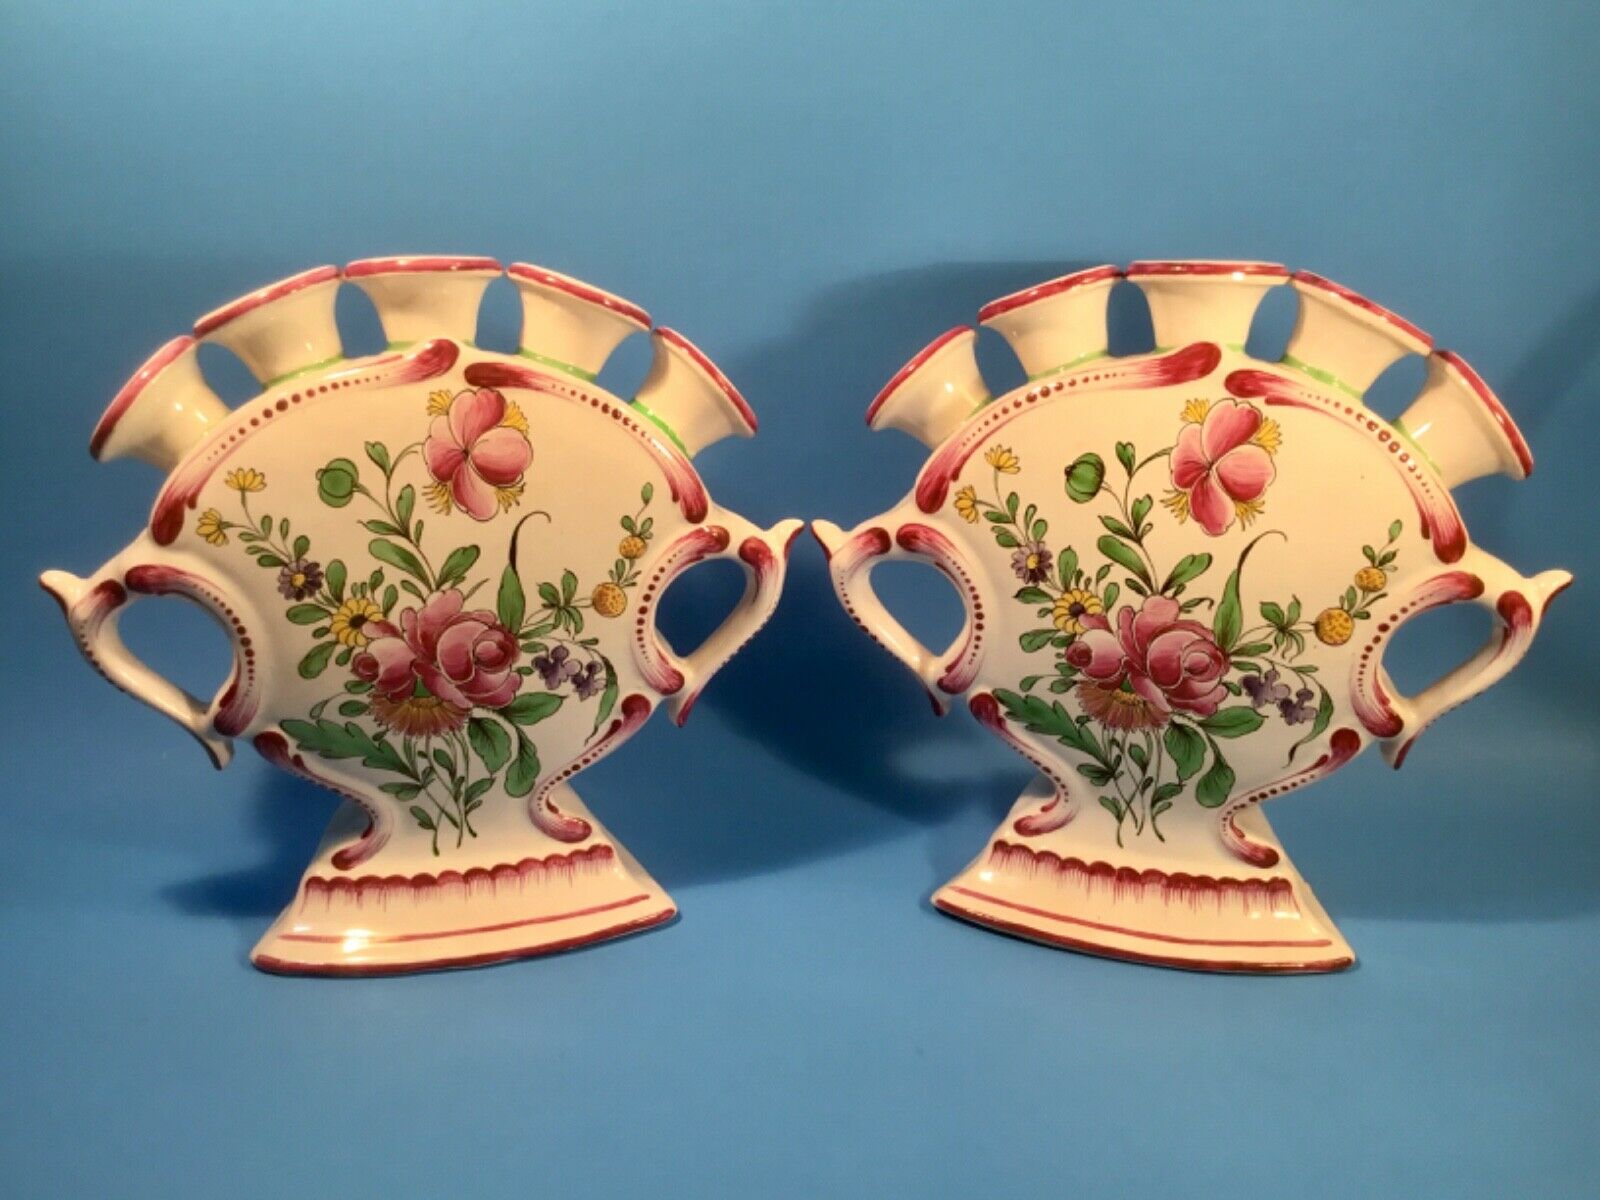 French Faience Vases Hand Painted Five Finger Vases c.1890-1920